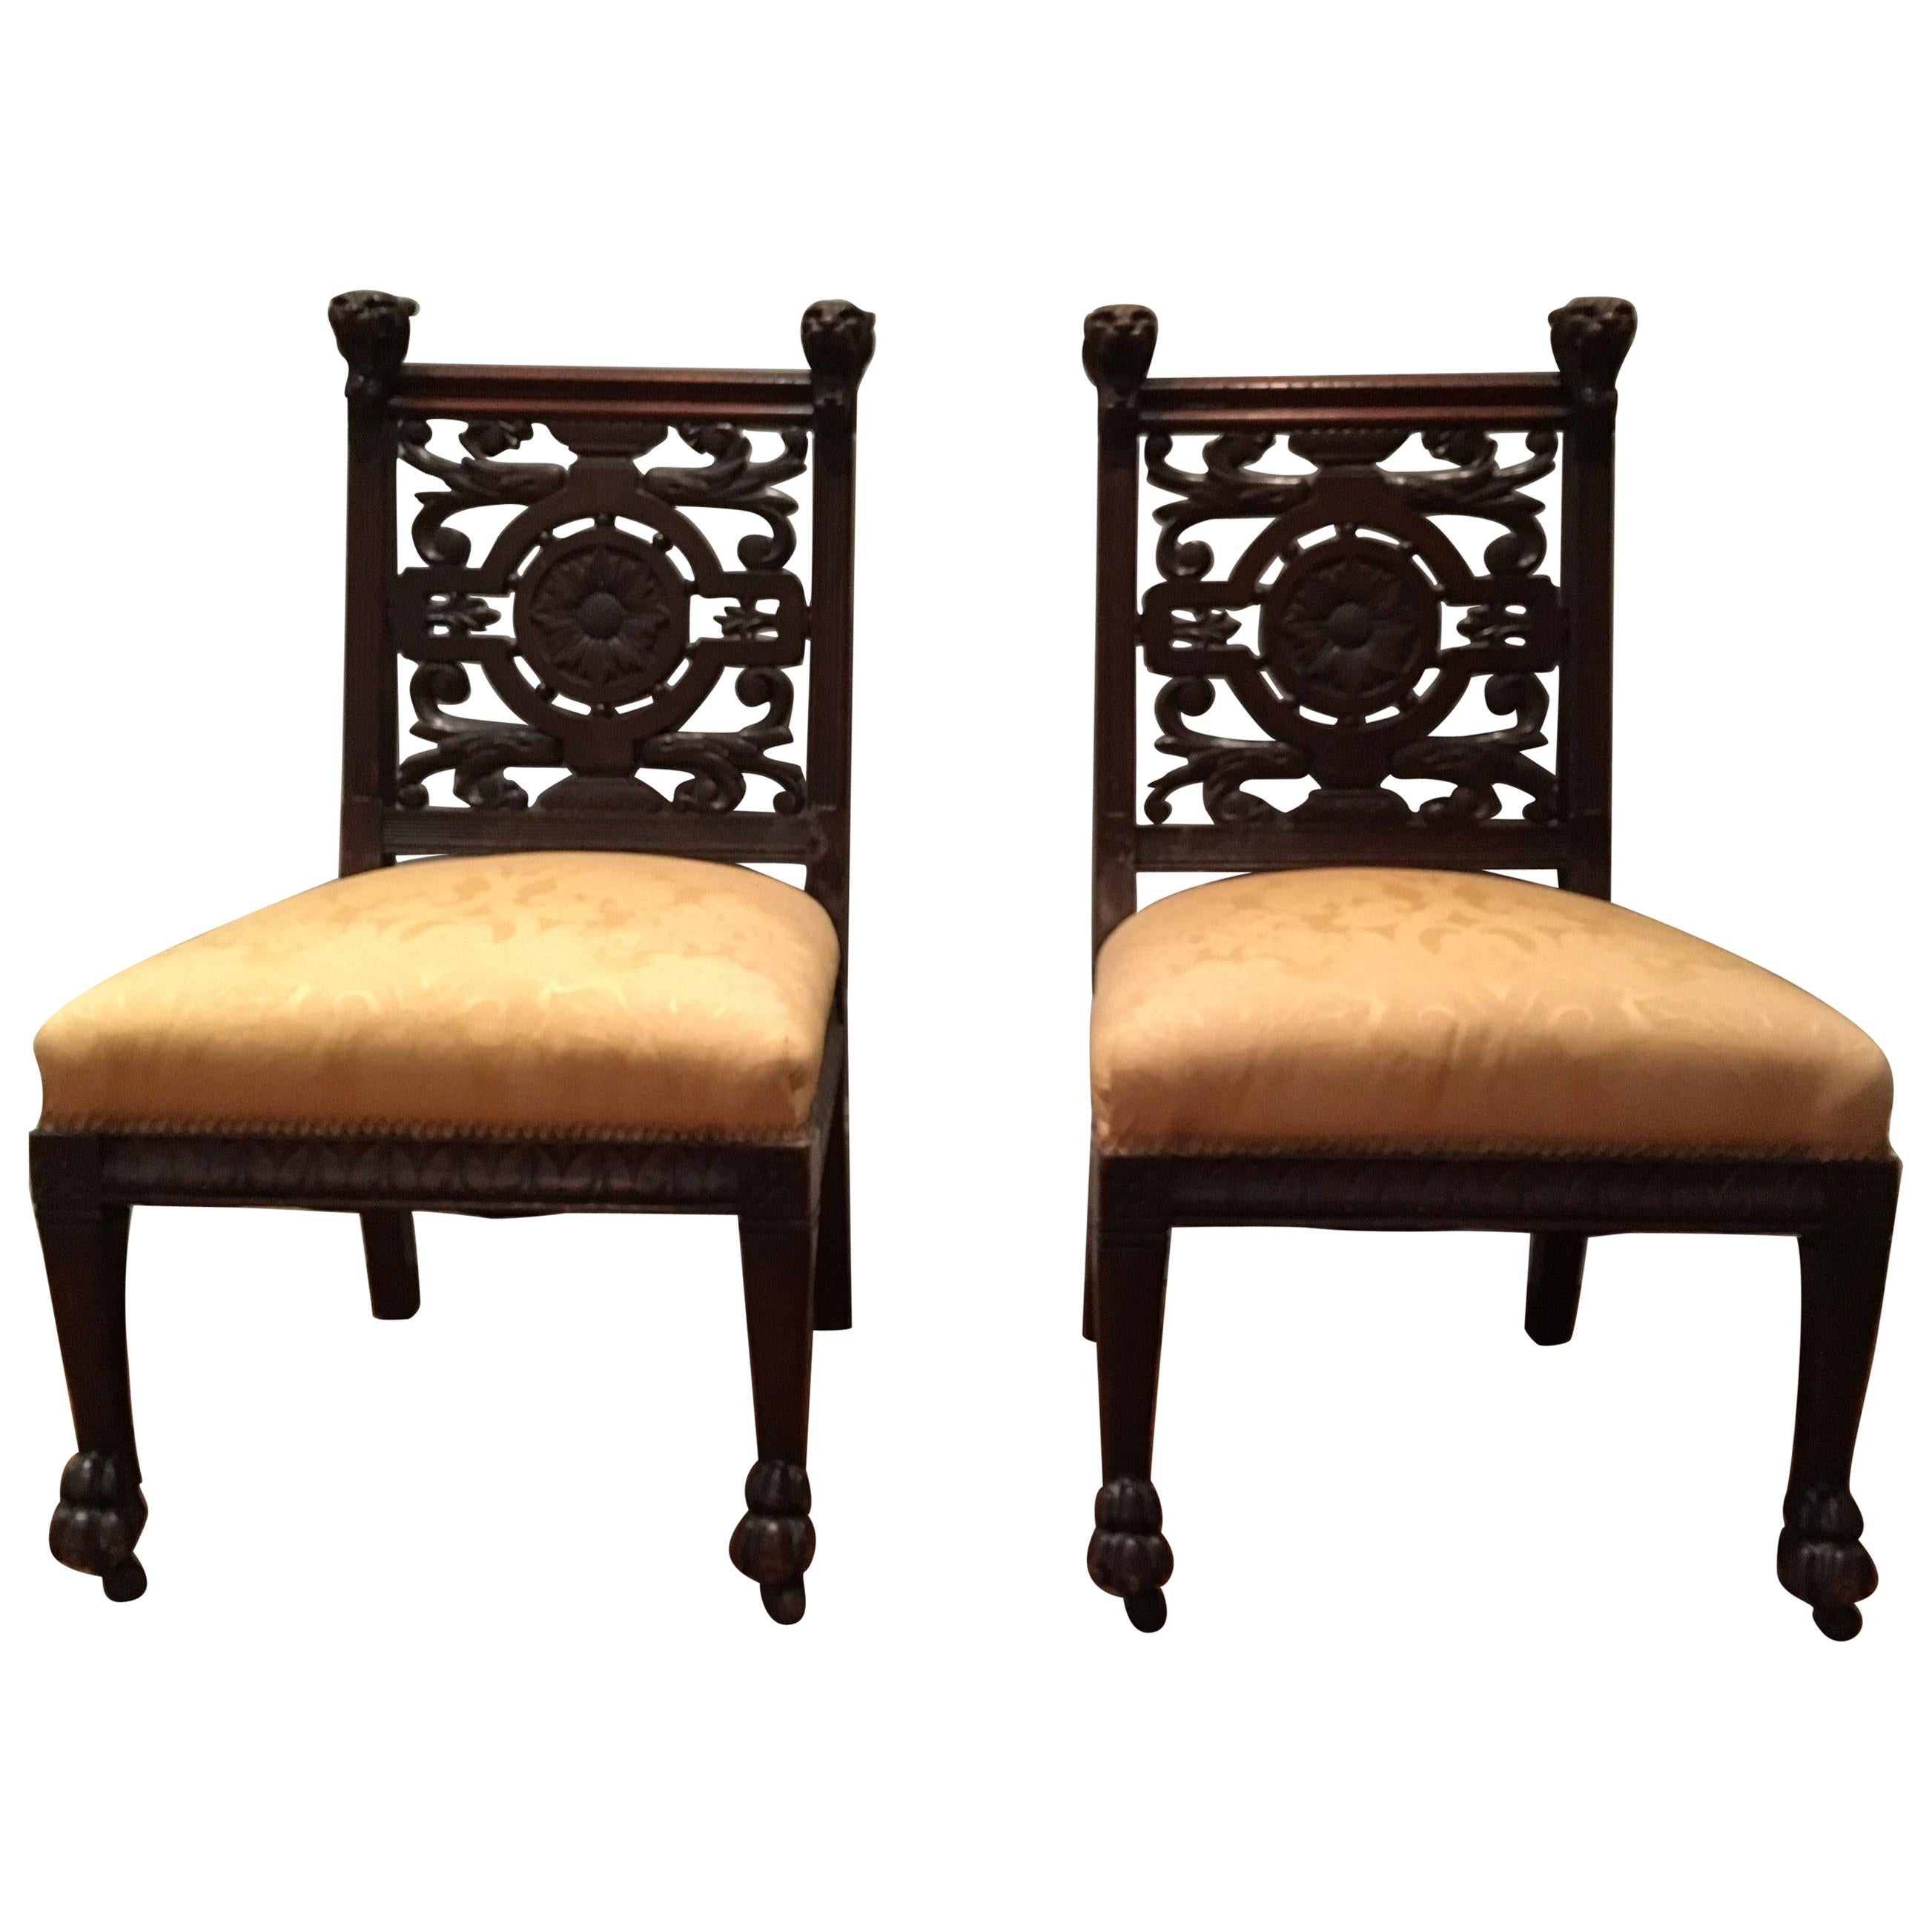 Pair of Late 19th Century Carved Side Chairs, Aesthetic Movement, circa 1890